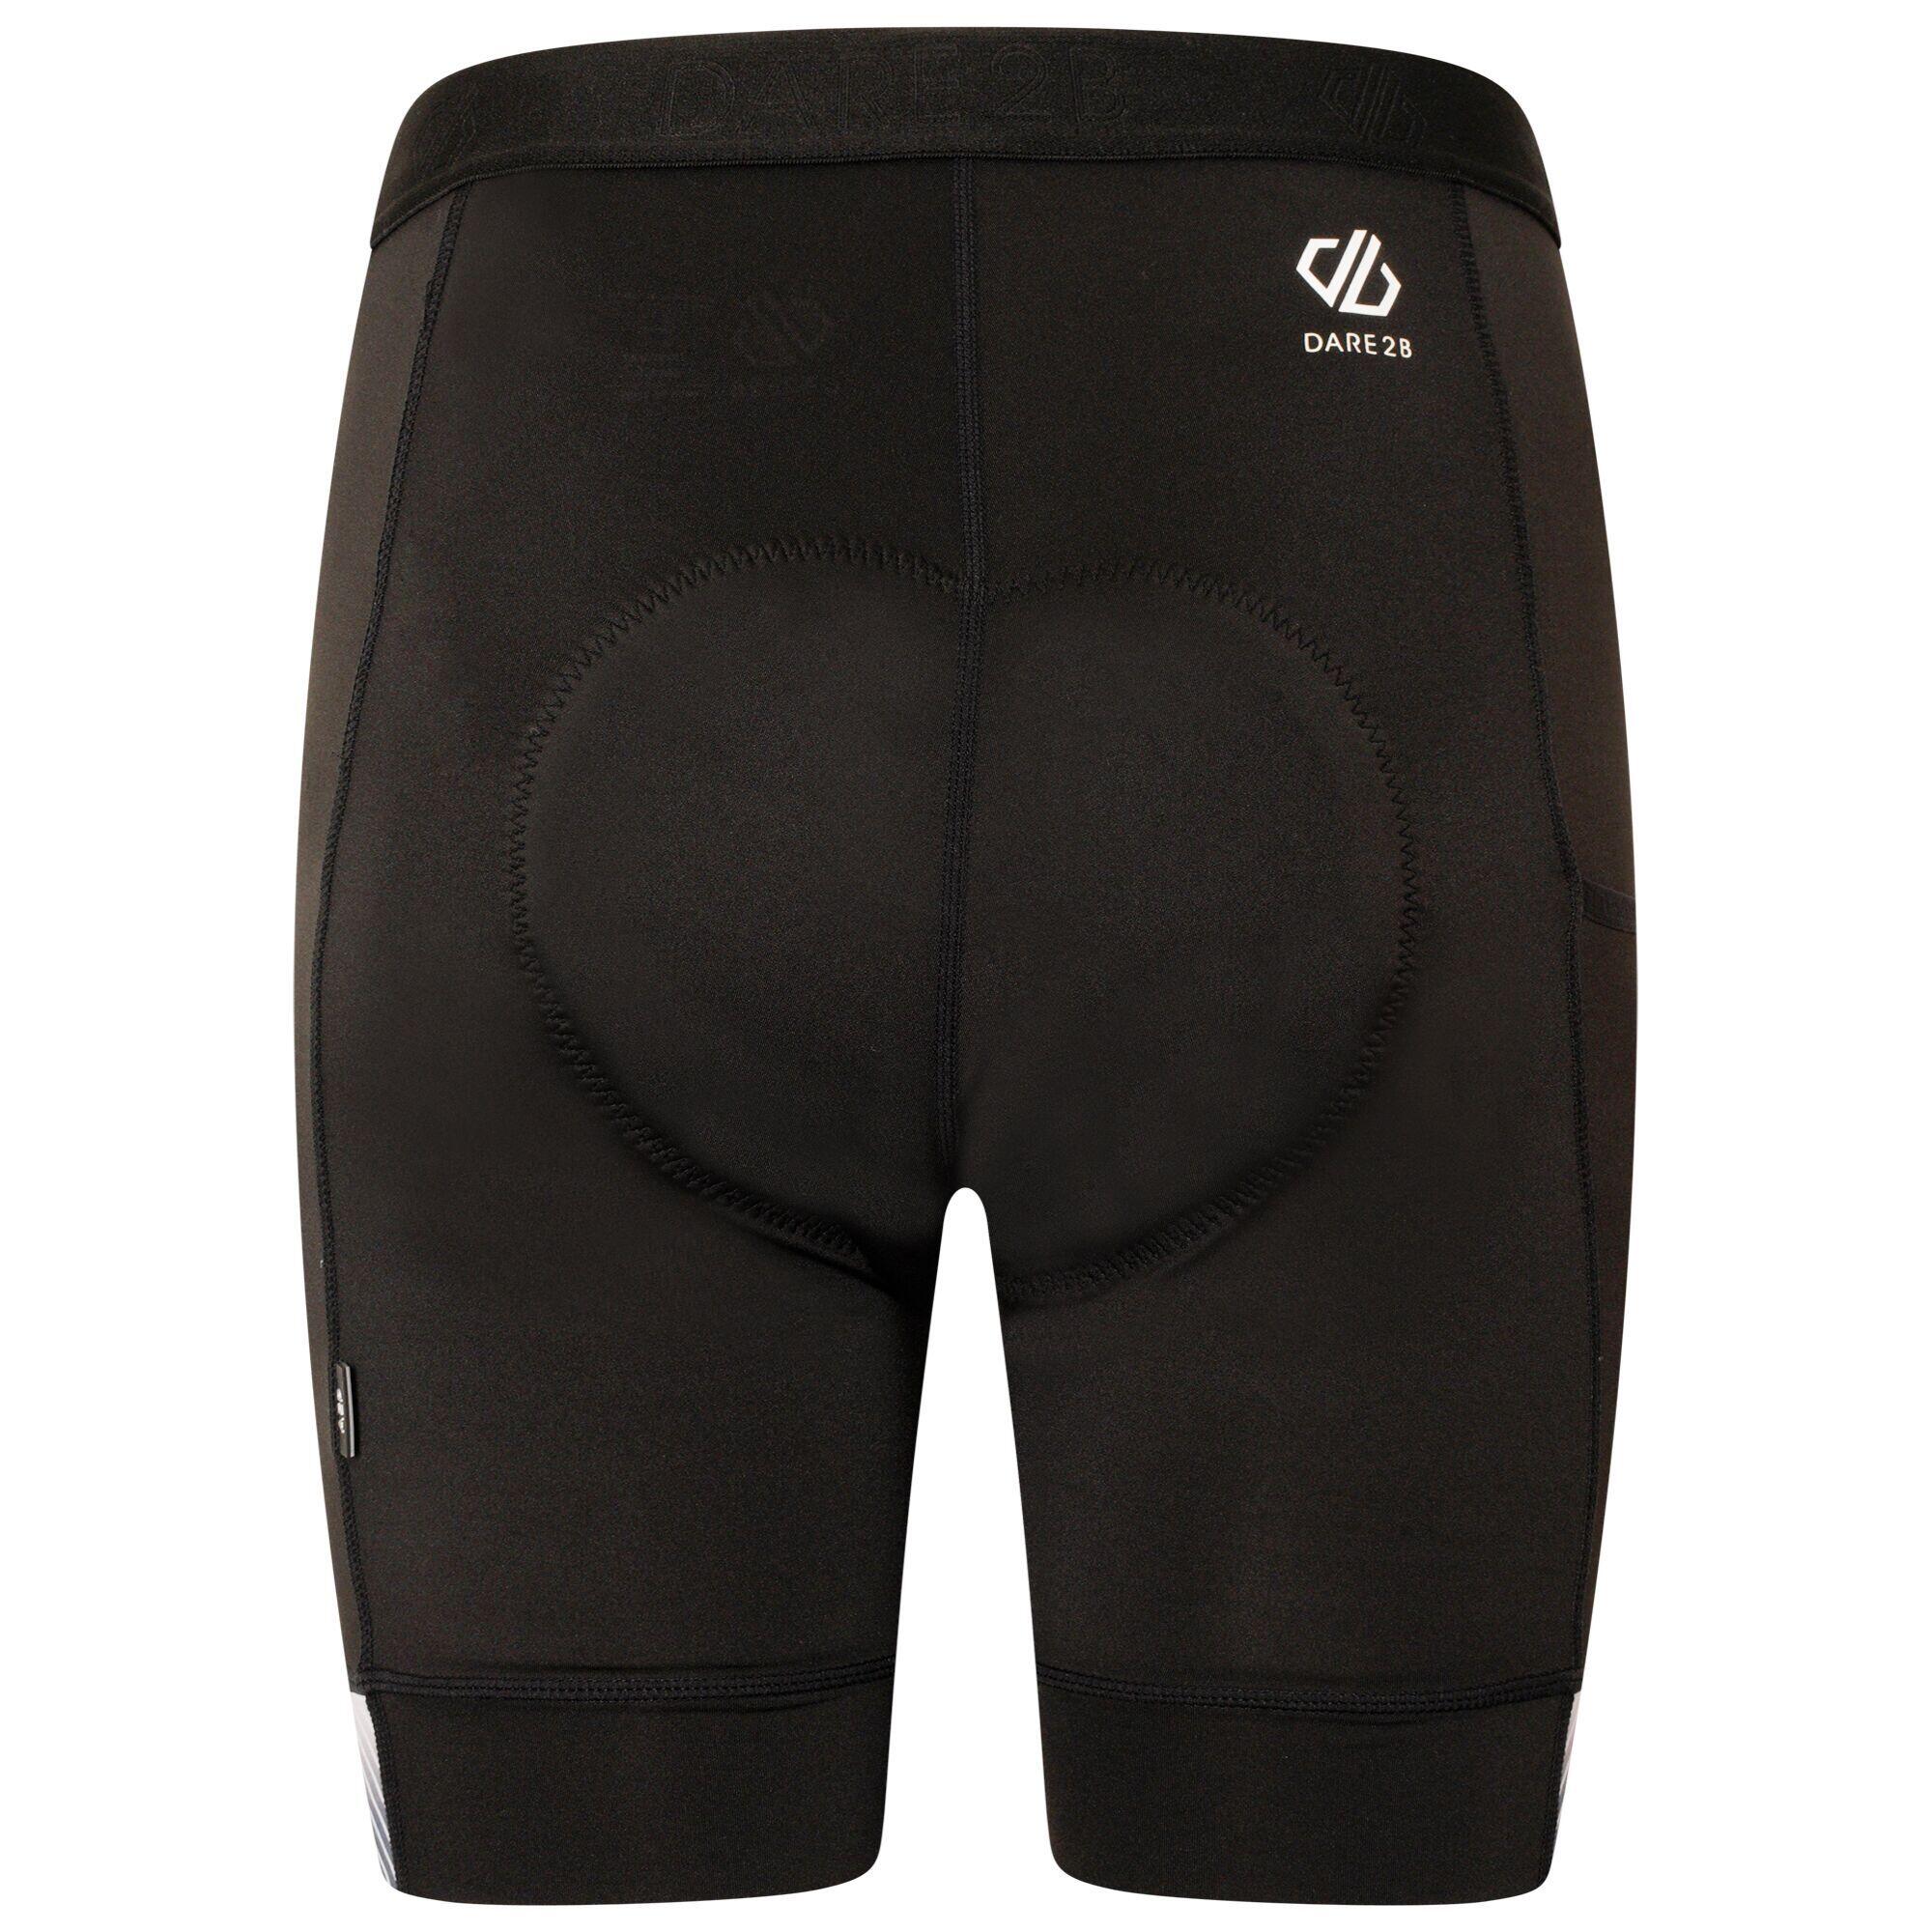 AEP Prompt Women's Fitness Shorts 6/6